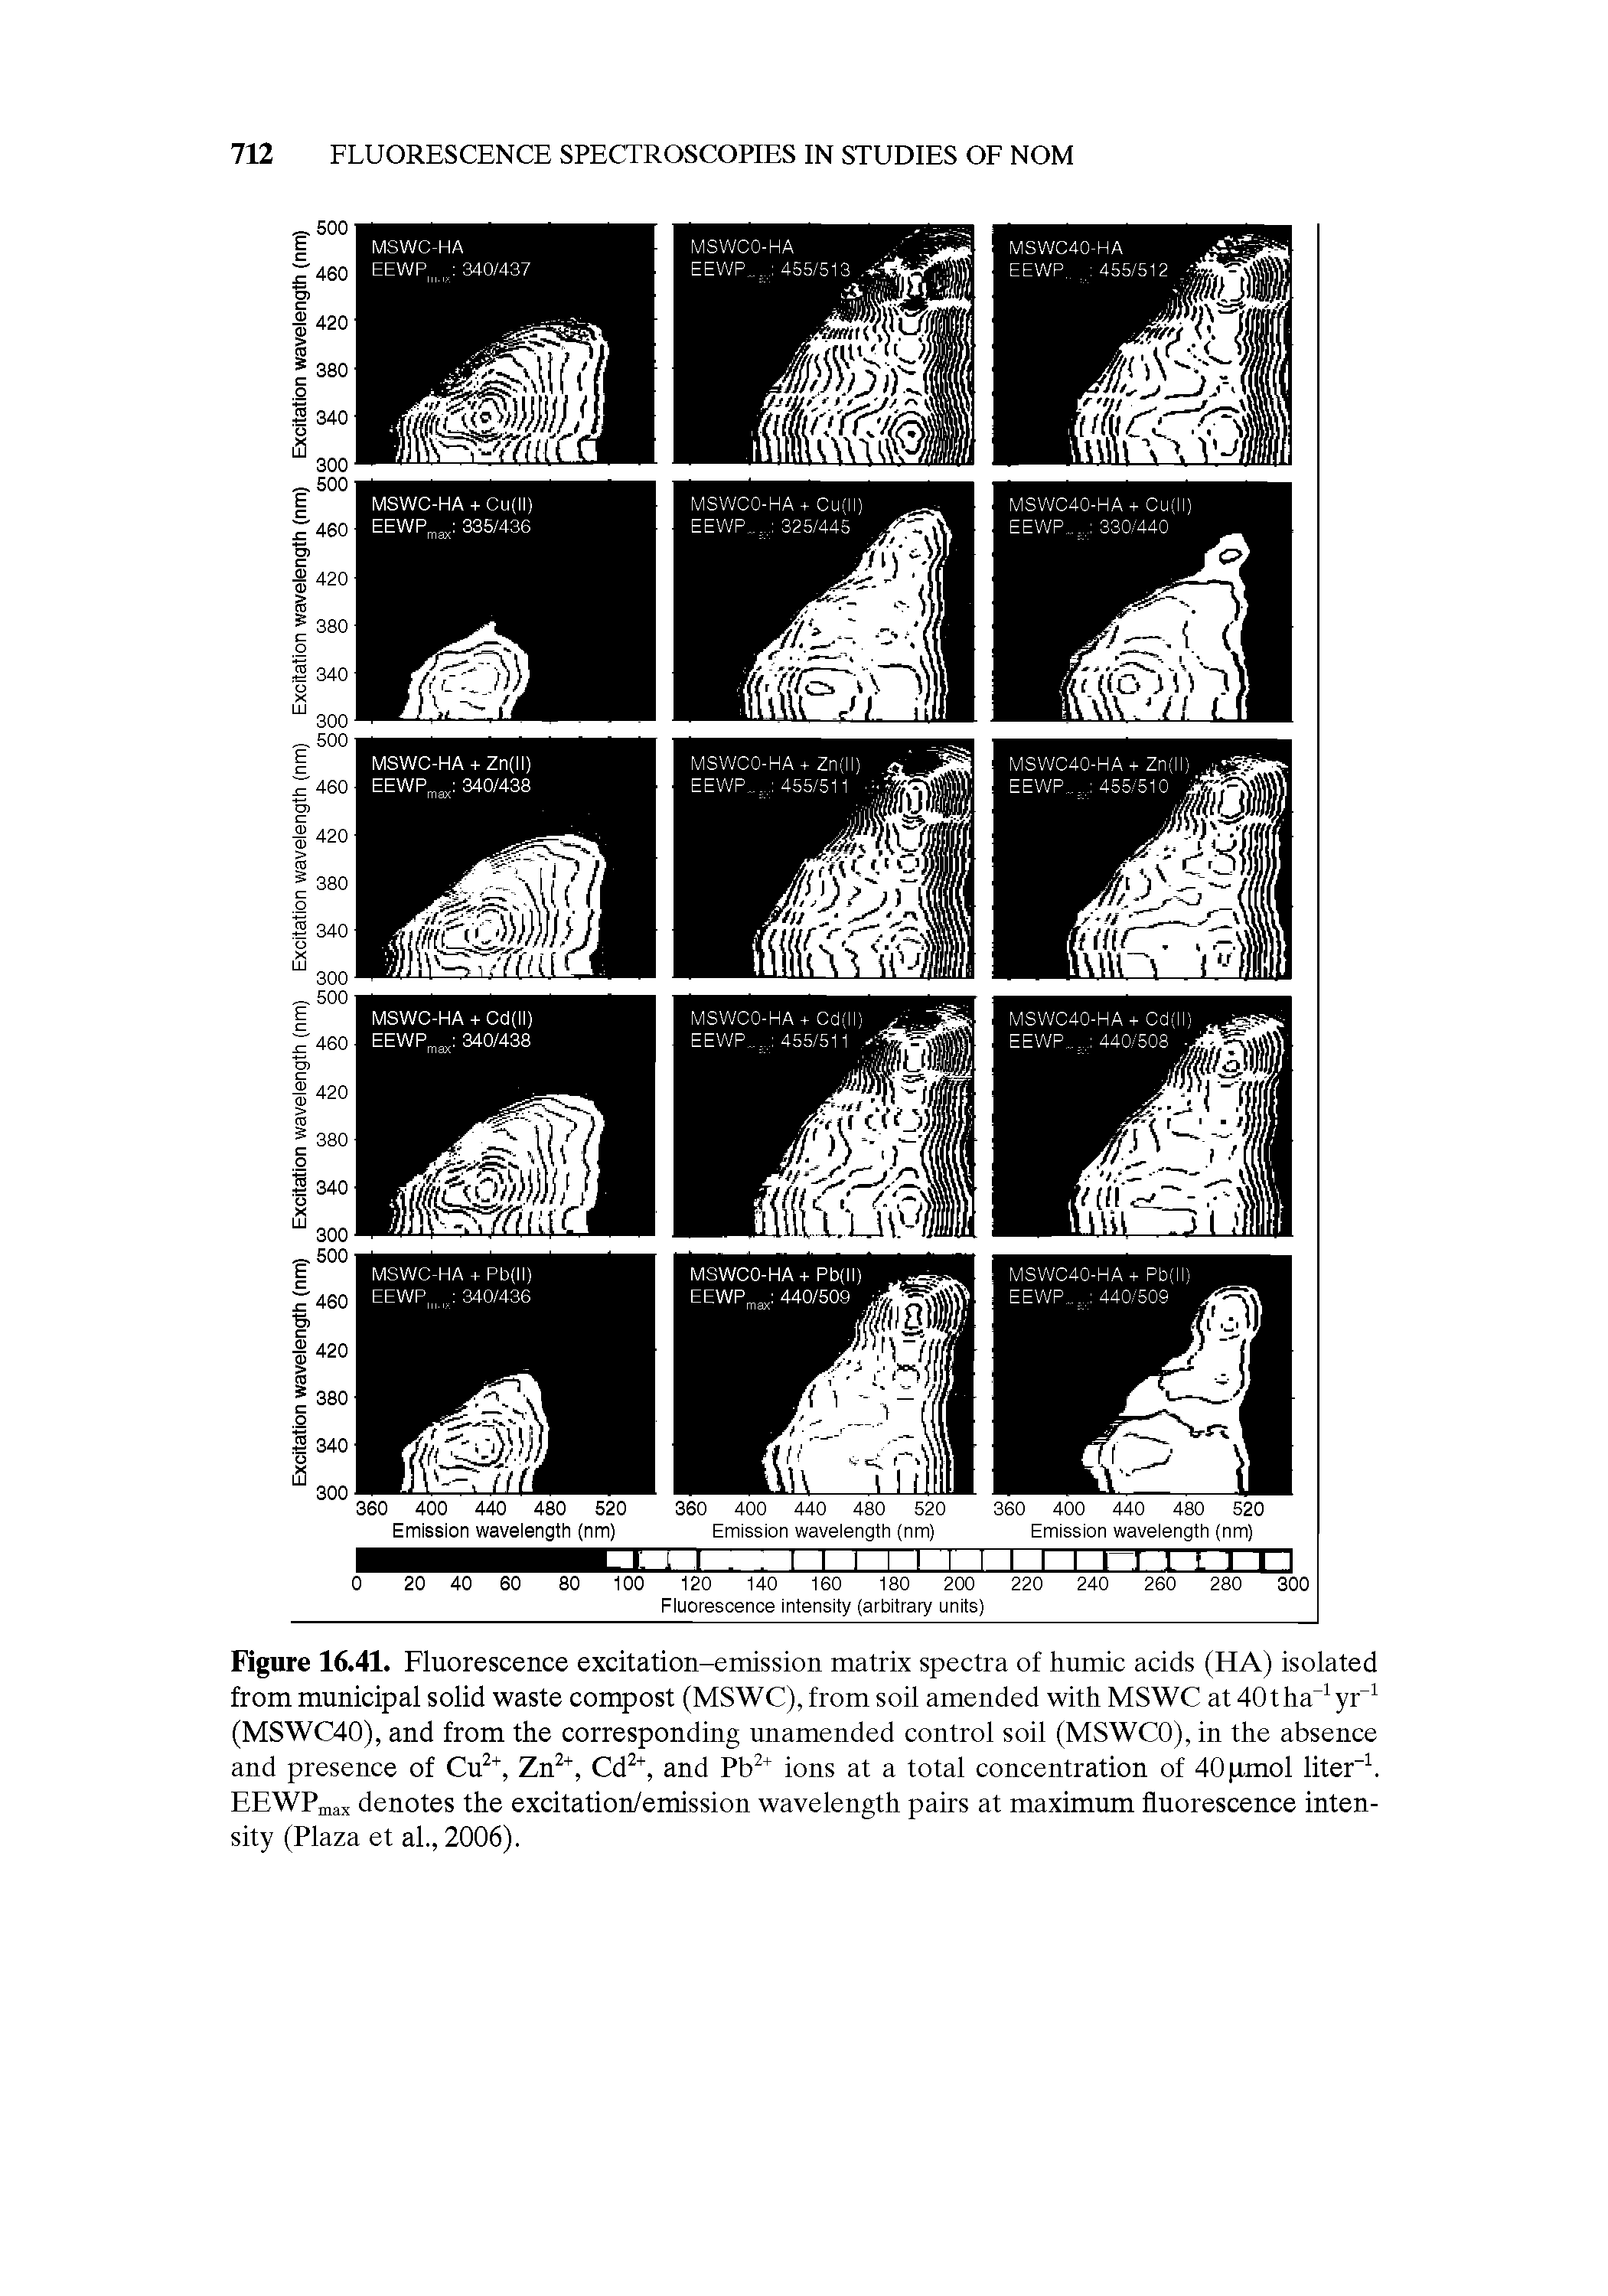 Figure 16.41. Fluorescence excitation-emission matrix spectra of humic acids (HA) isolated from municipal solid waste compost (MSWC), from soil amended with MSWC at 40tha 1yr 1 (MSWC40), and from the corresponding unamended control soil (MSWC0), in the absence and presence of Cu2+, Zn2+, Cd2+, and Pb2+ ions at a total concentration of 40 xmol liter-1. EEWPmax denotes the excitation/emission wavelength pairs at maximum fluorescence intensity (Plaza et al., 2006).